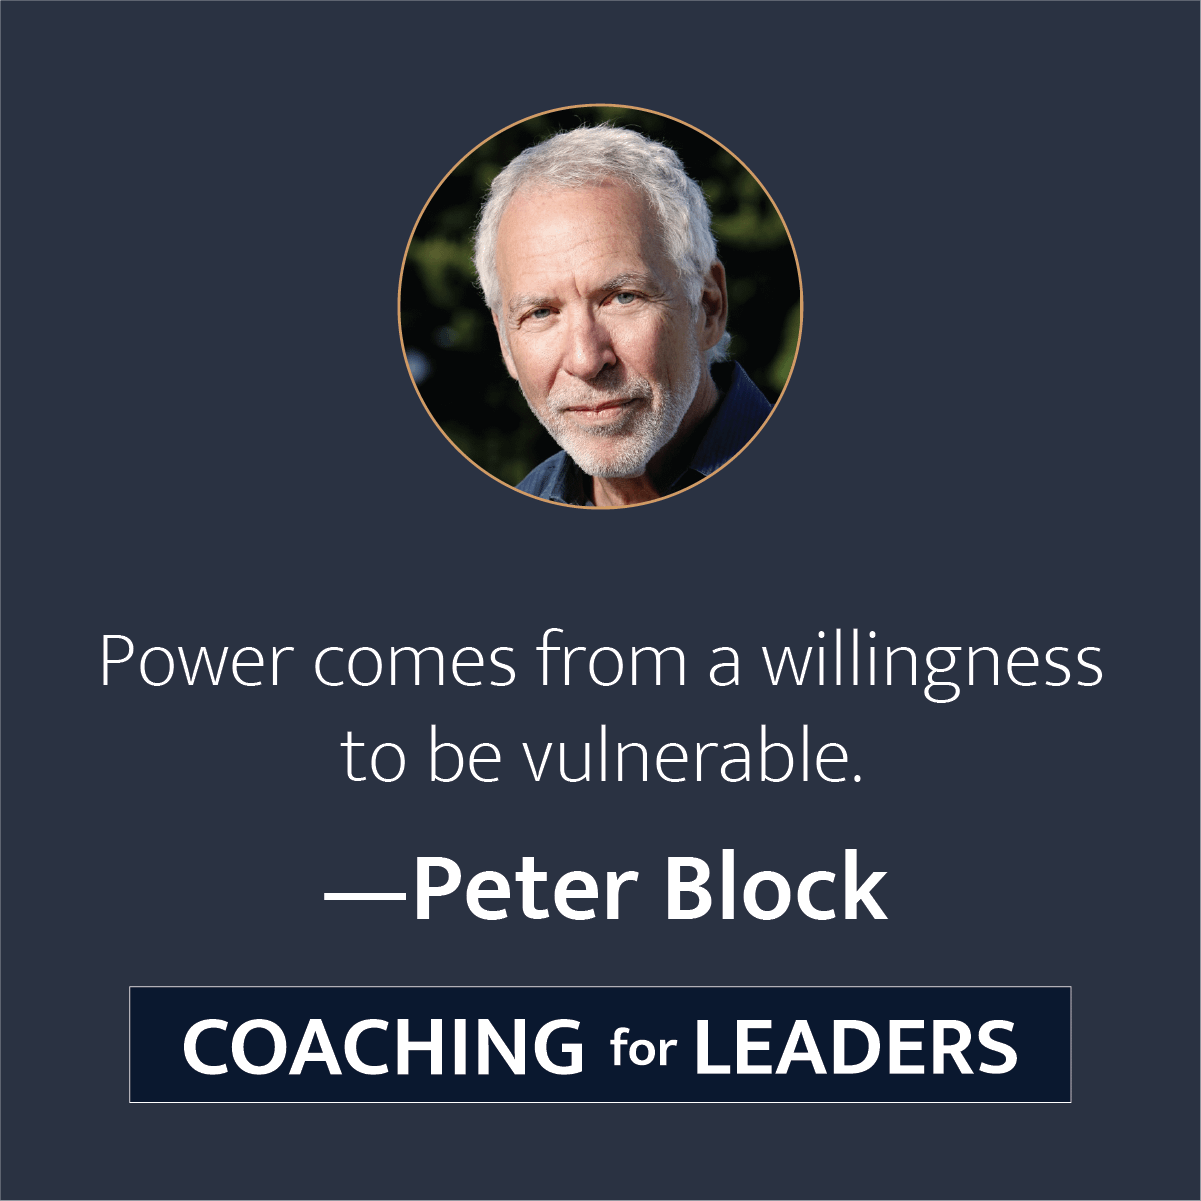 Power comes from a willingness to be vulnerable.